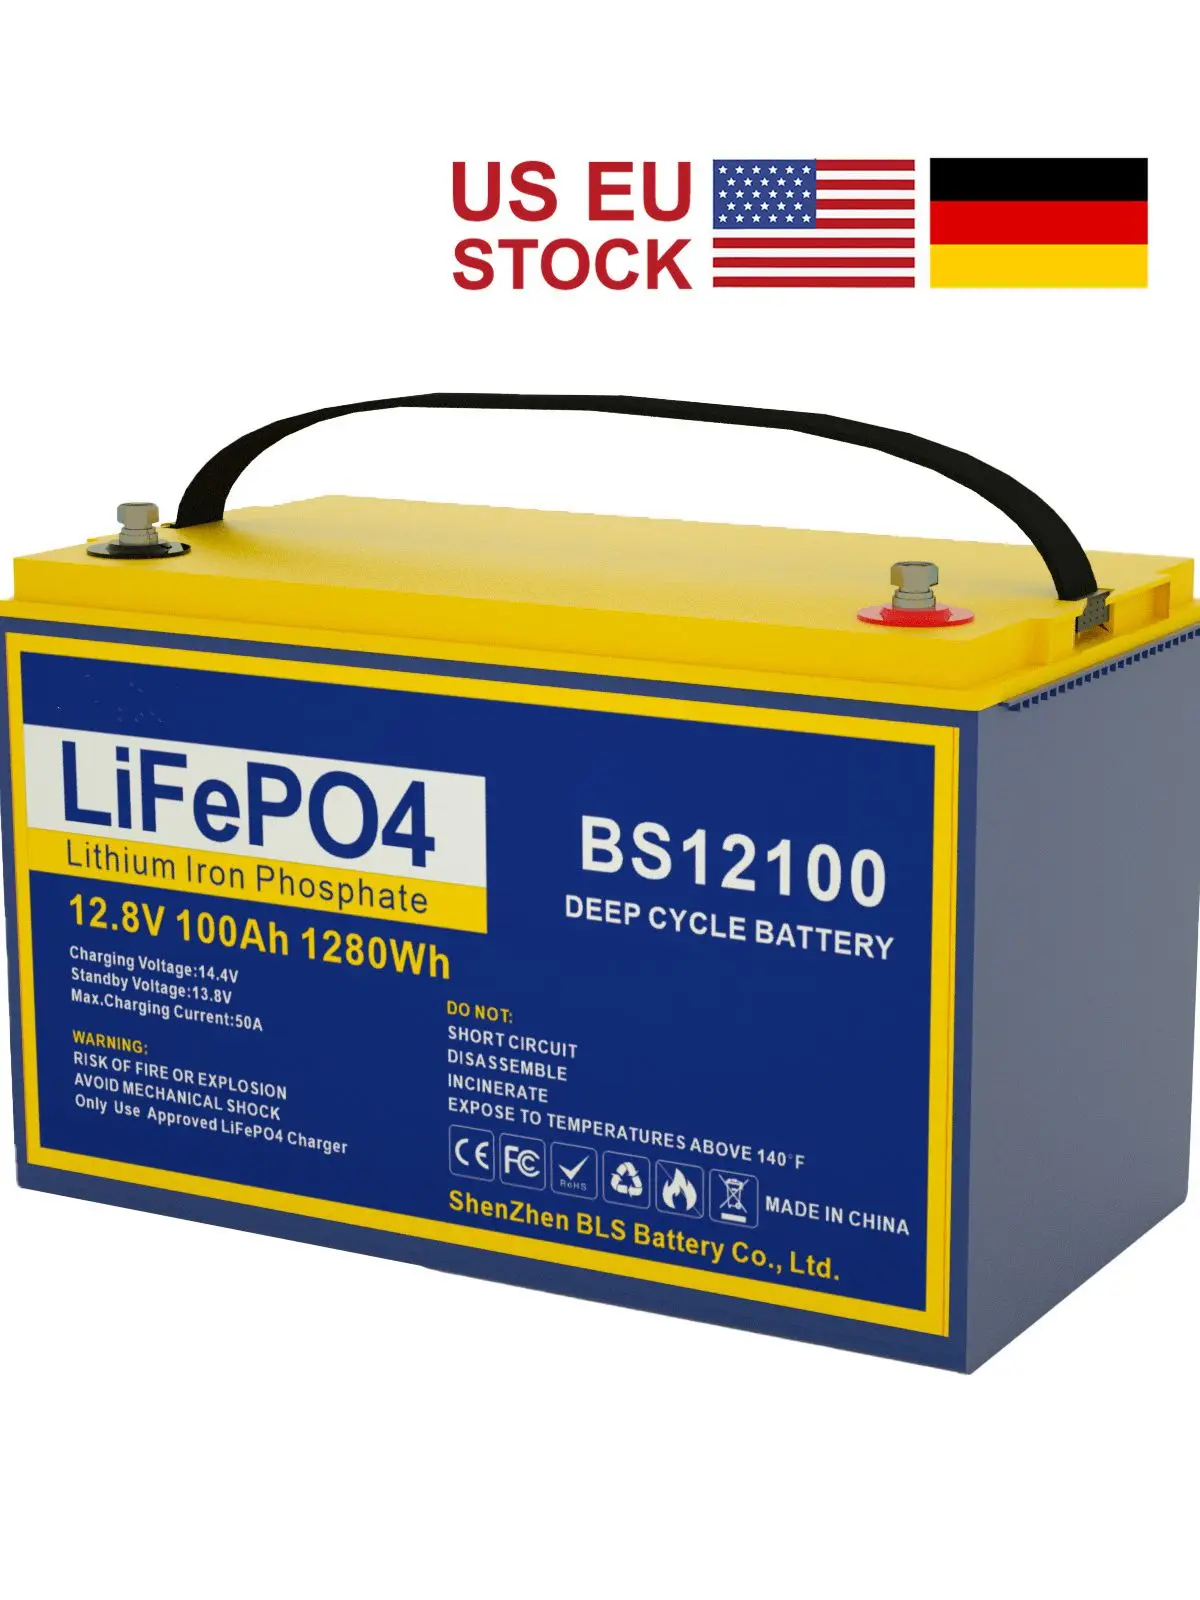 12V 100Ah LiFePO4 Deep Cycle Battery with 4s 12.8V 80A BMS Replace Most of Backup Power Solar RV BOAT US EU DHL UPS Fast Ship